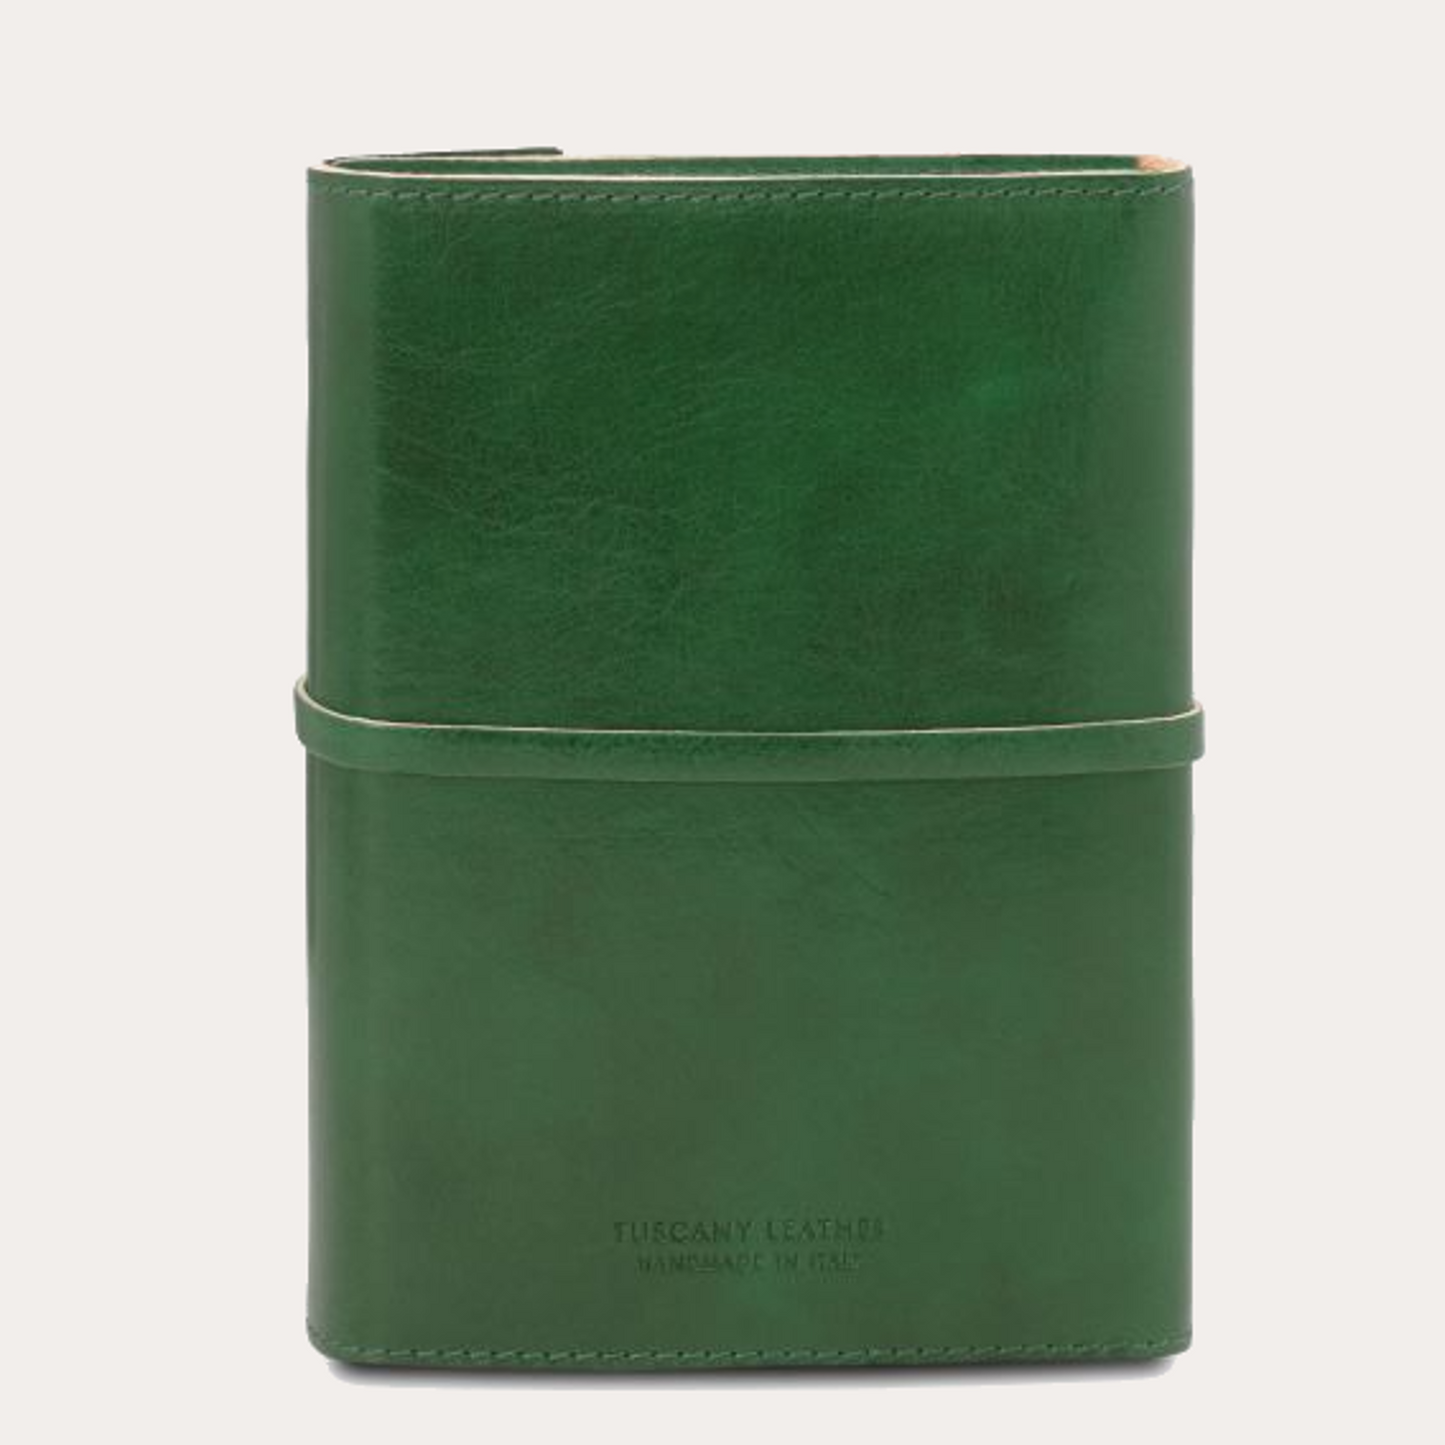 Tuscany Leather Forest Green Leather Journal / Notebook